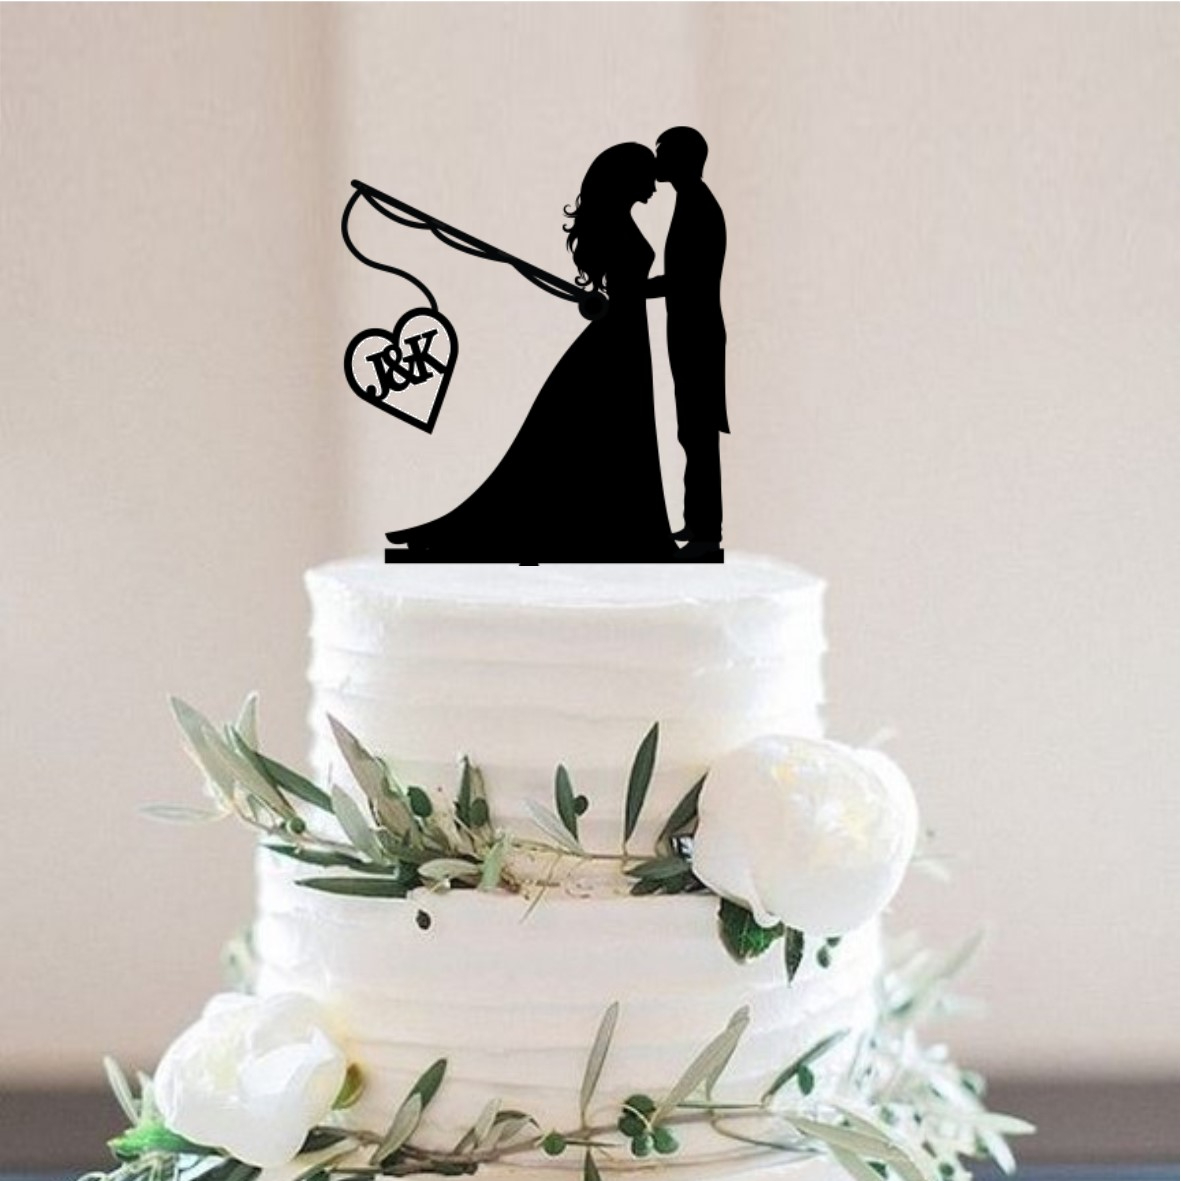 Quick Creations Cake Topper - Bride & Groom Fishing Initials